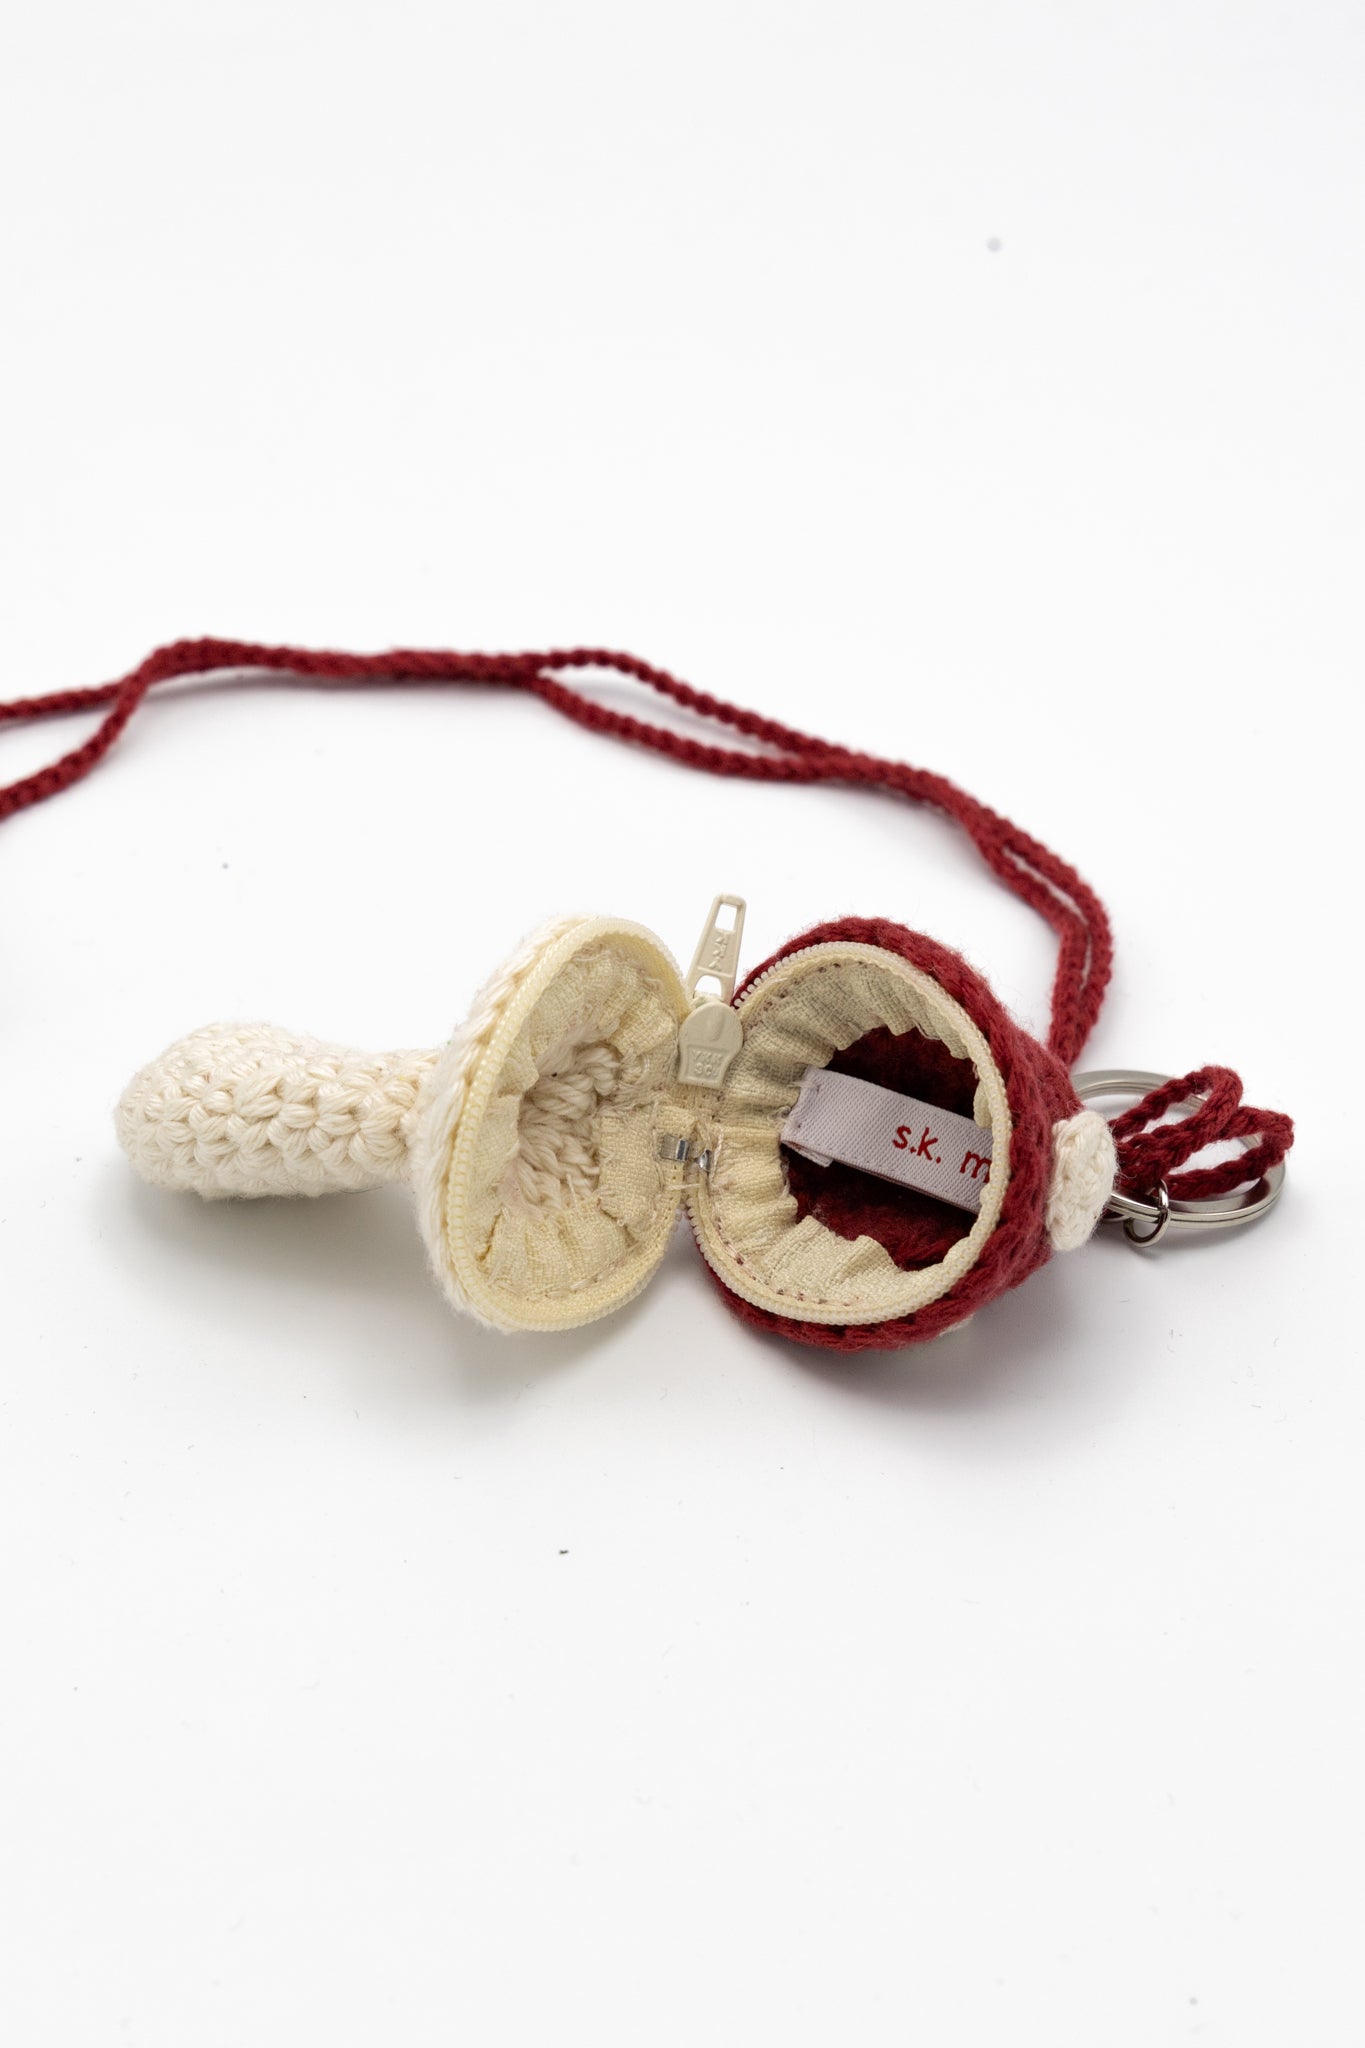 Small Mushroom Keychain Necklace - Red